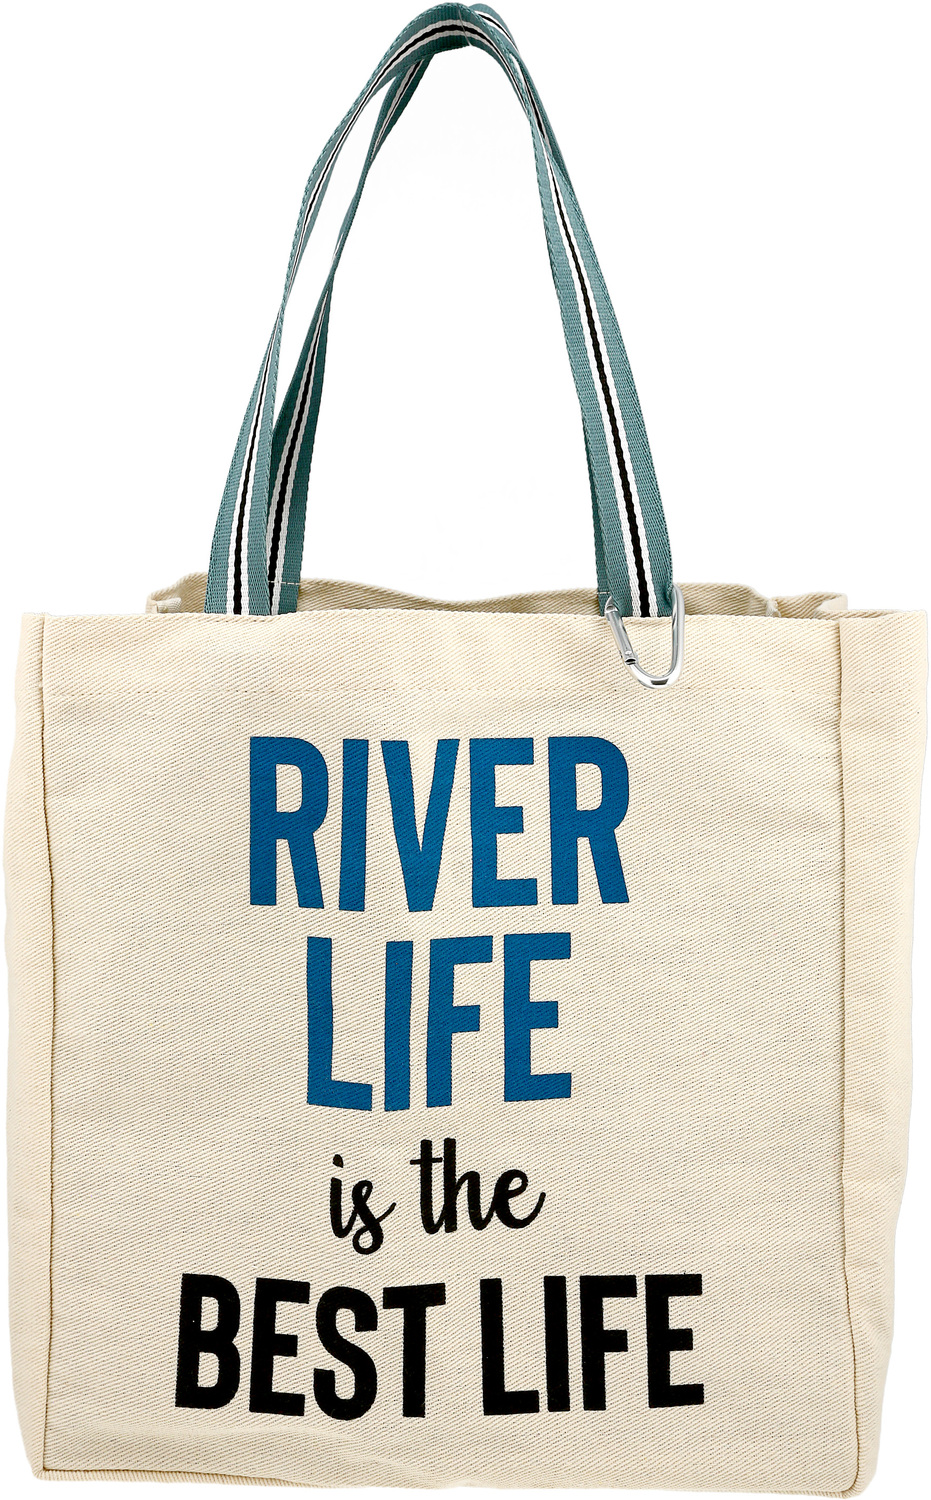 River Life by Check Me Out - River Life - 100% Cotton Twill Gift Bag